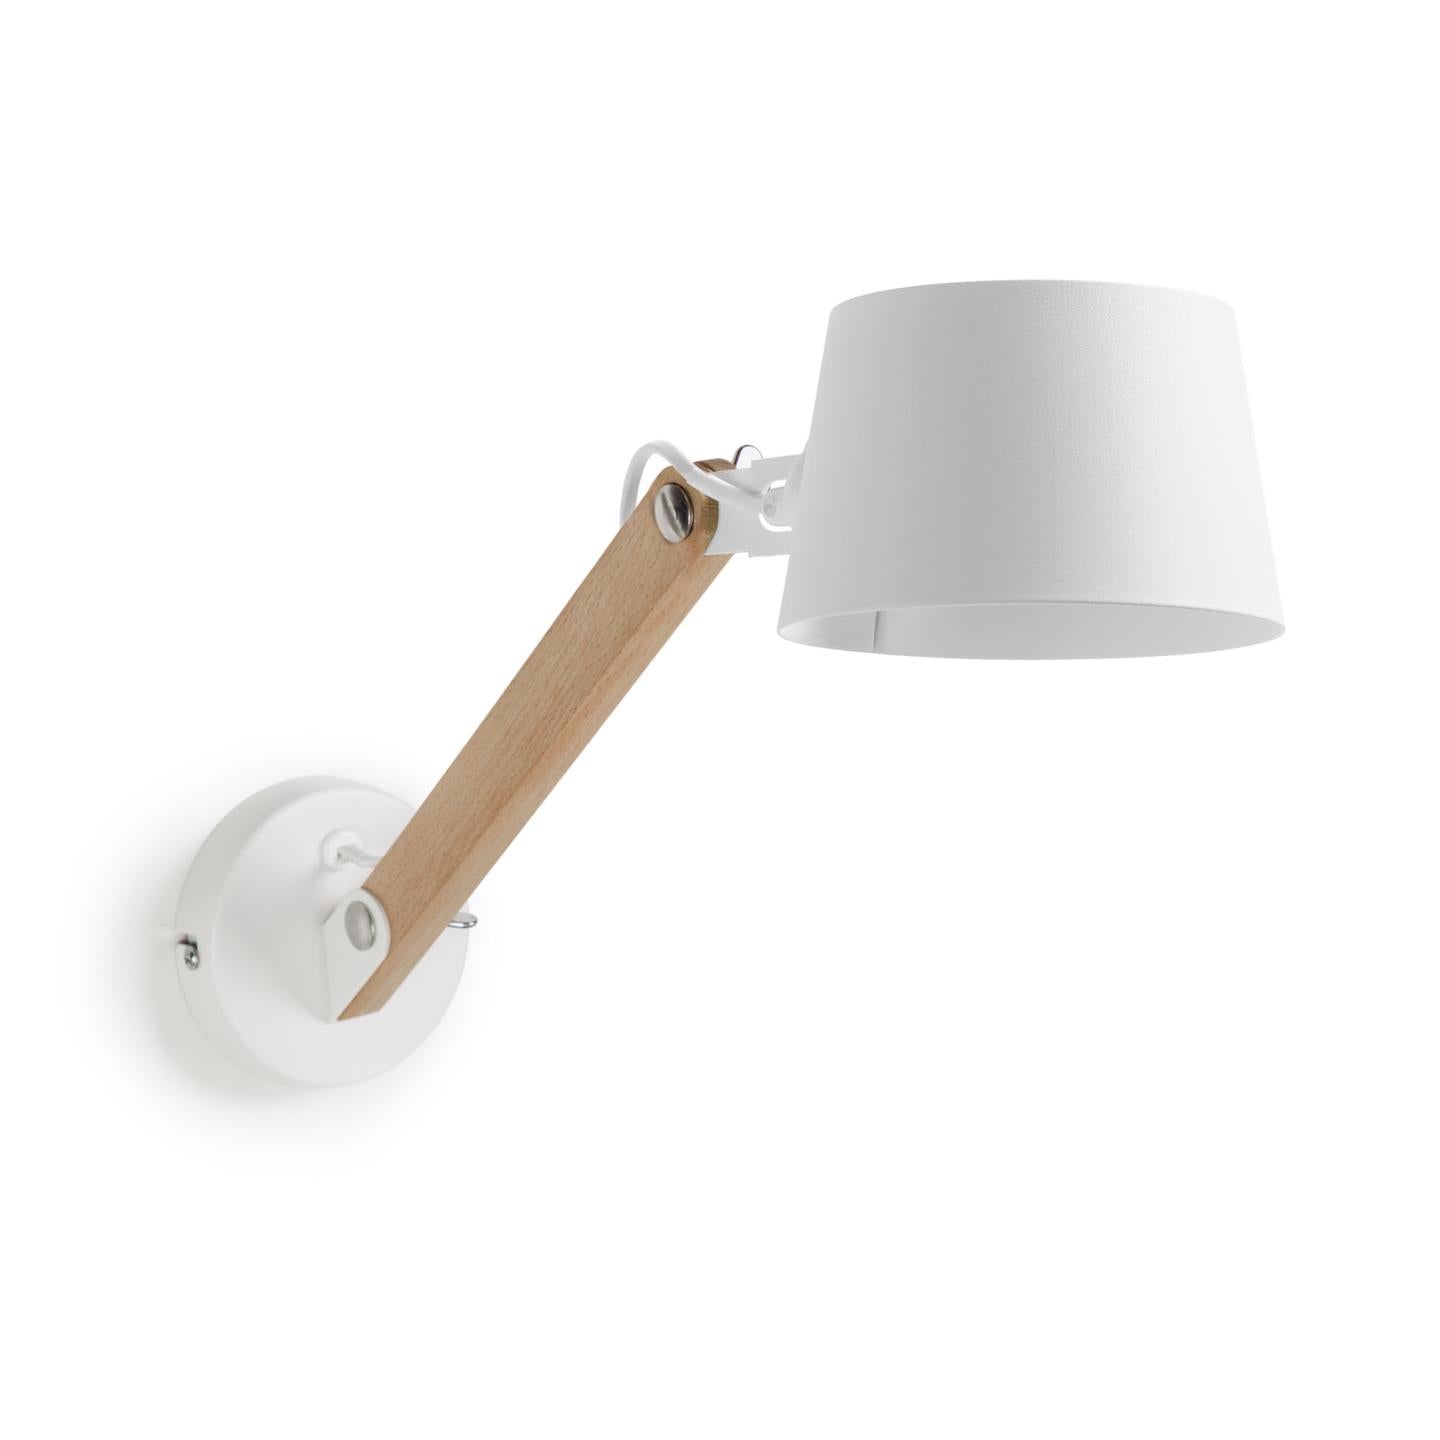 Muse wall light made from beech and steel with a white finish